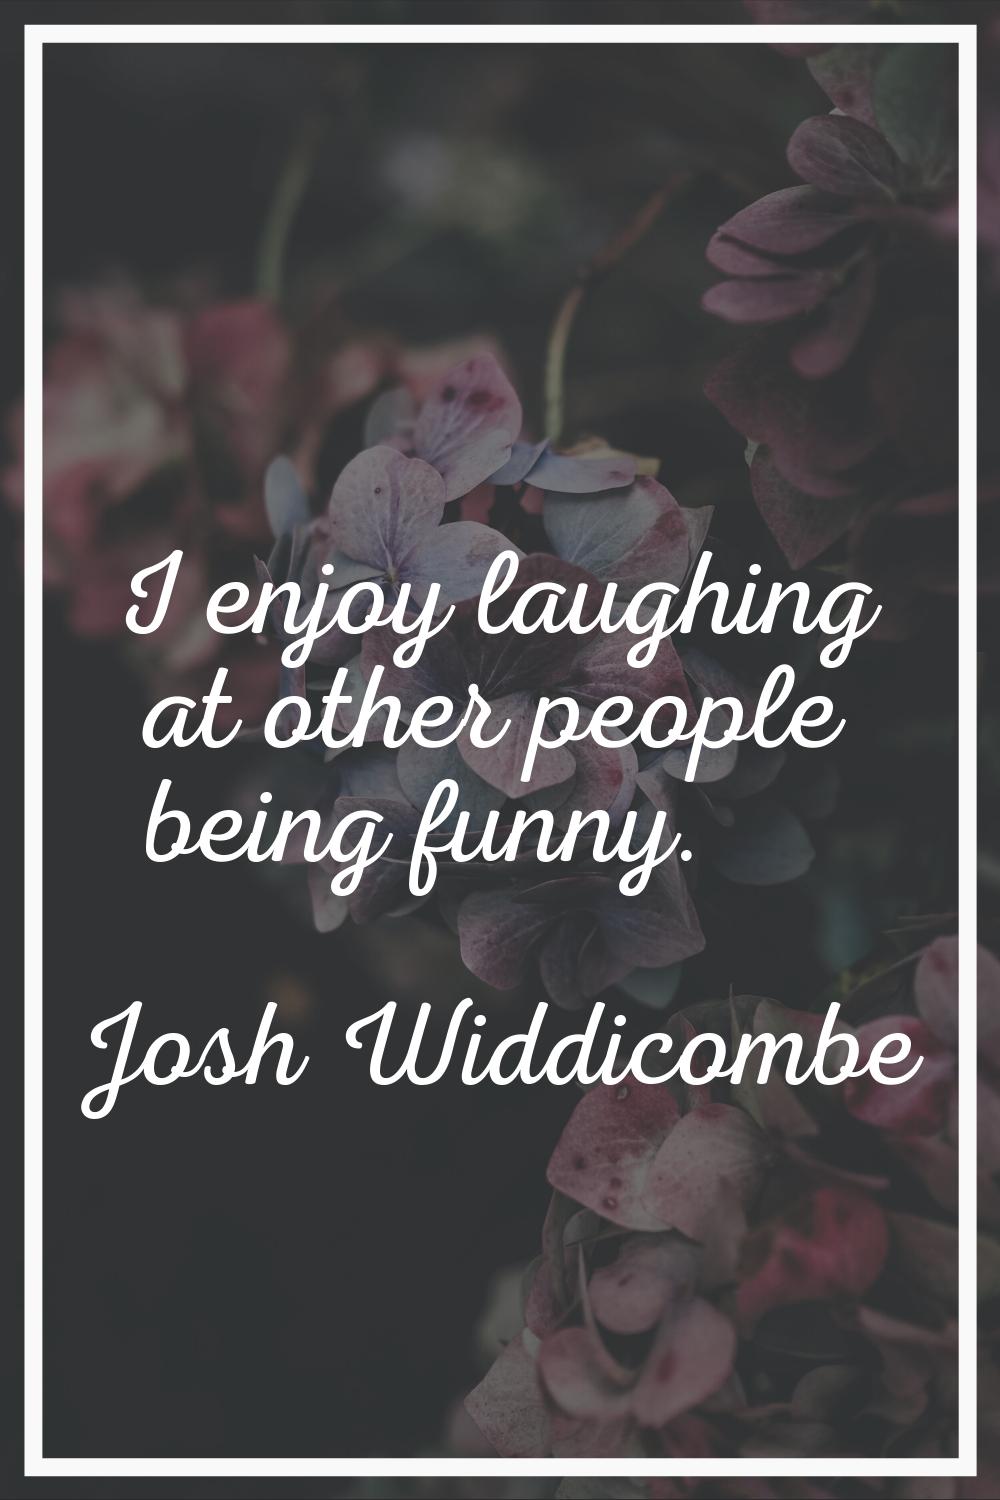 I enjoy laughing at other people being funny.